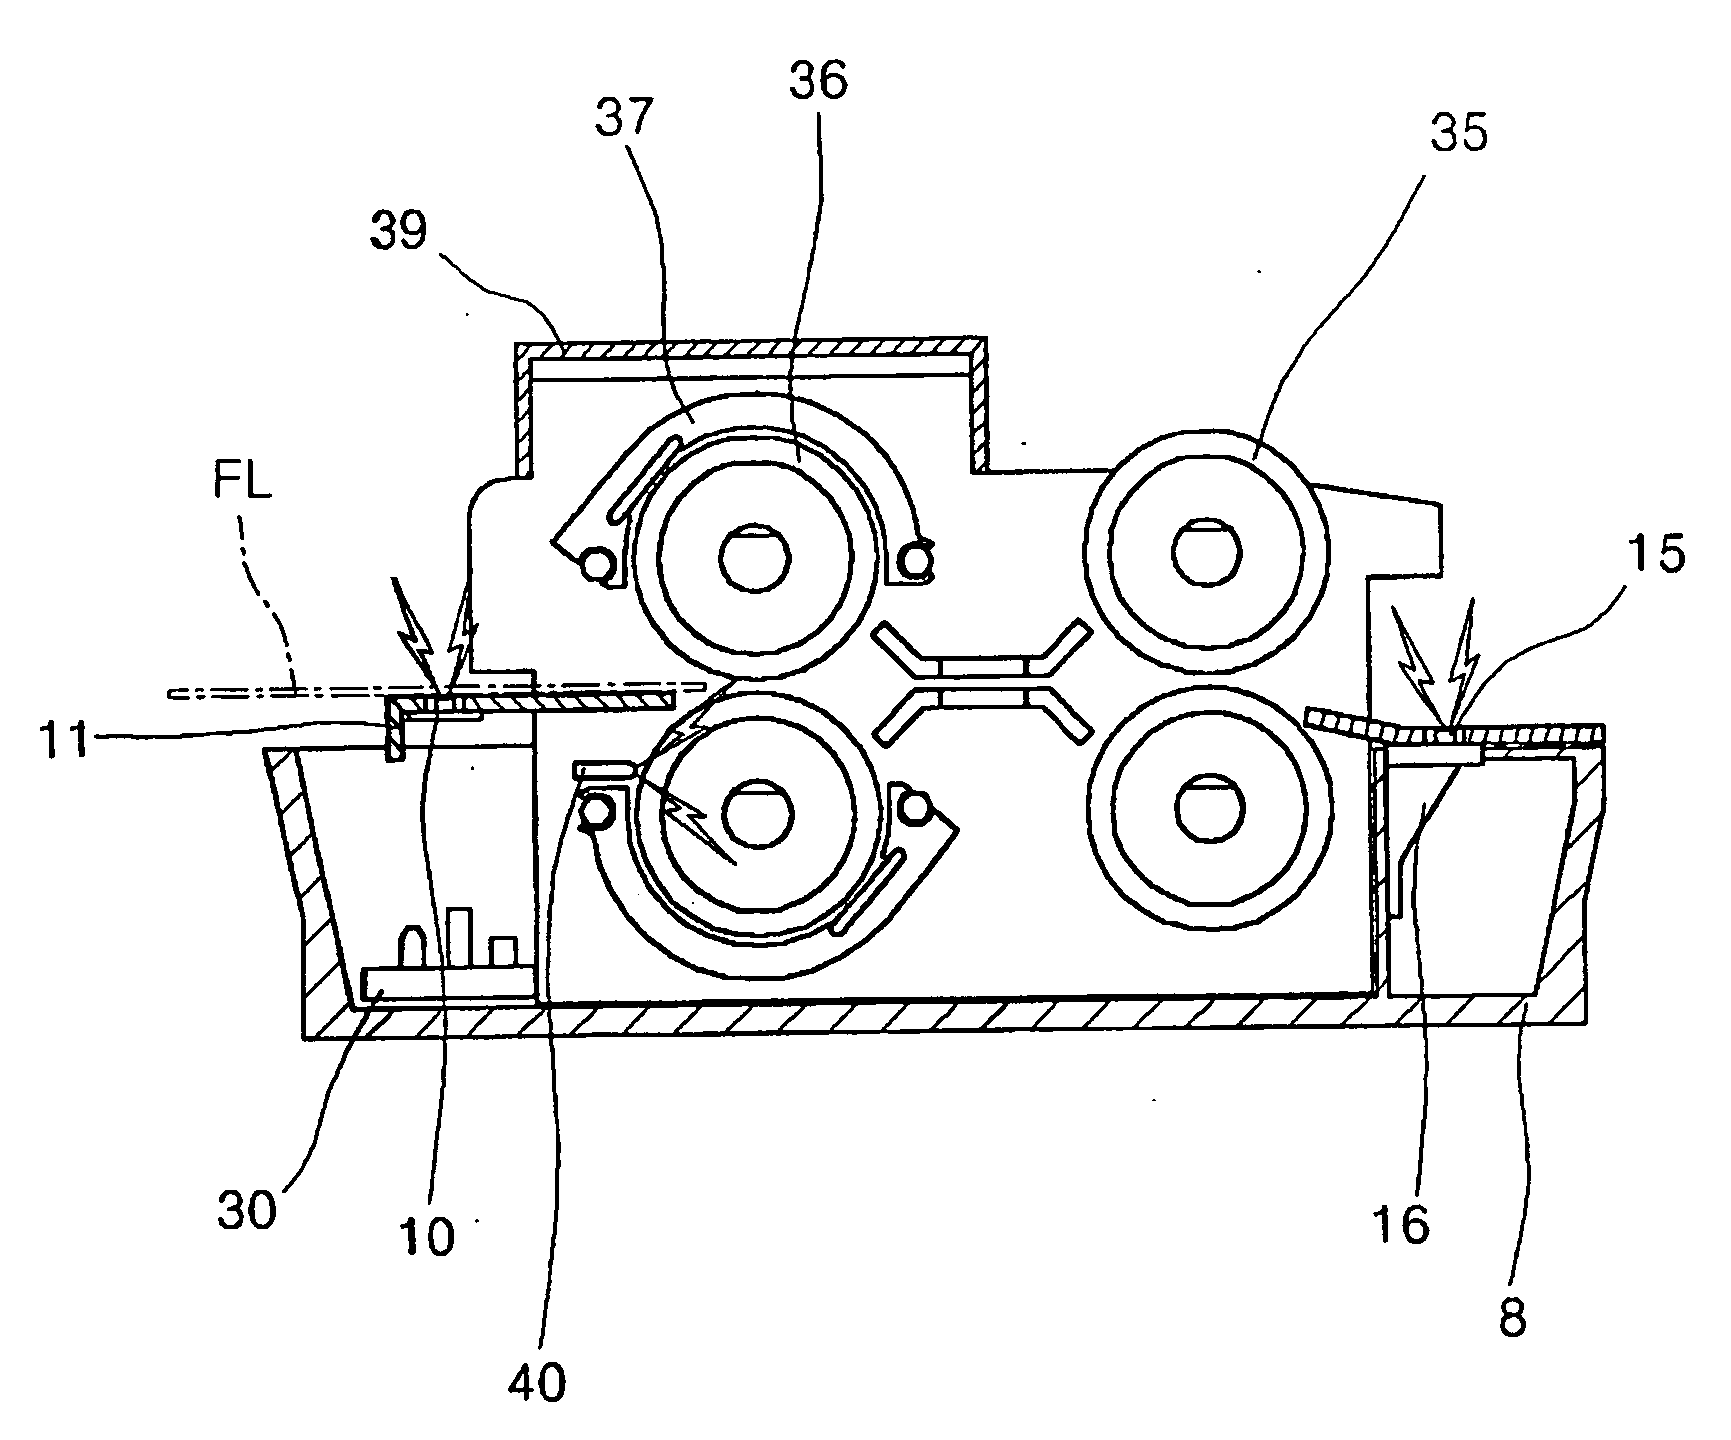 Apparatus and method for controlling roller rotation of laminator